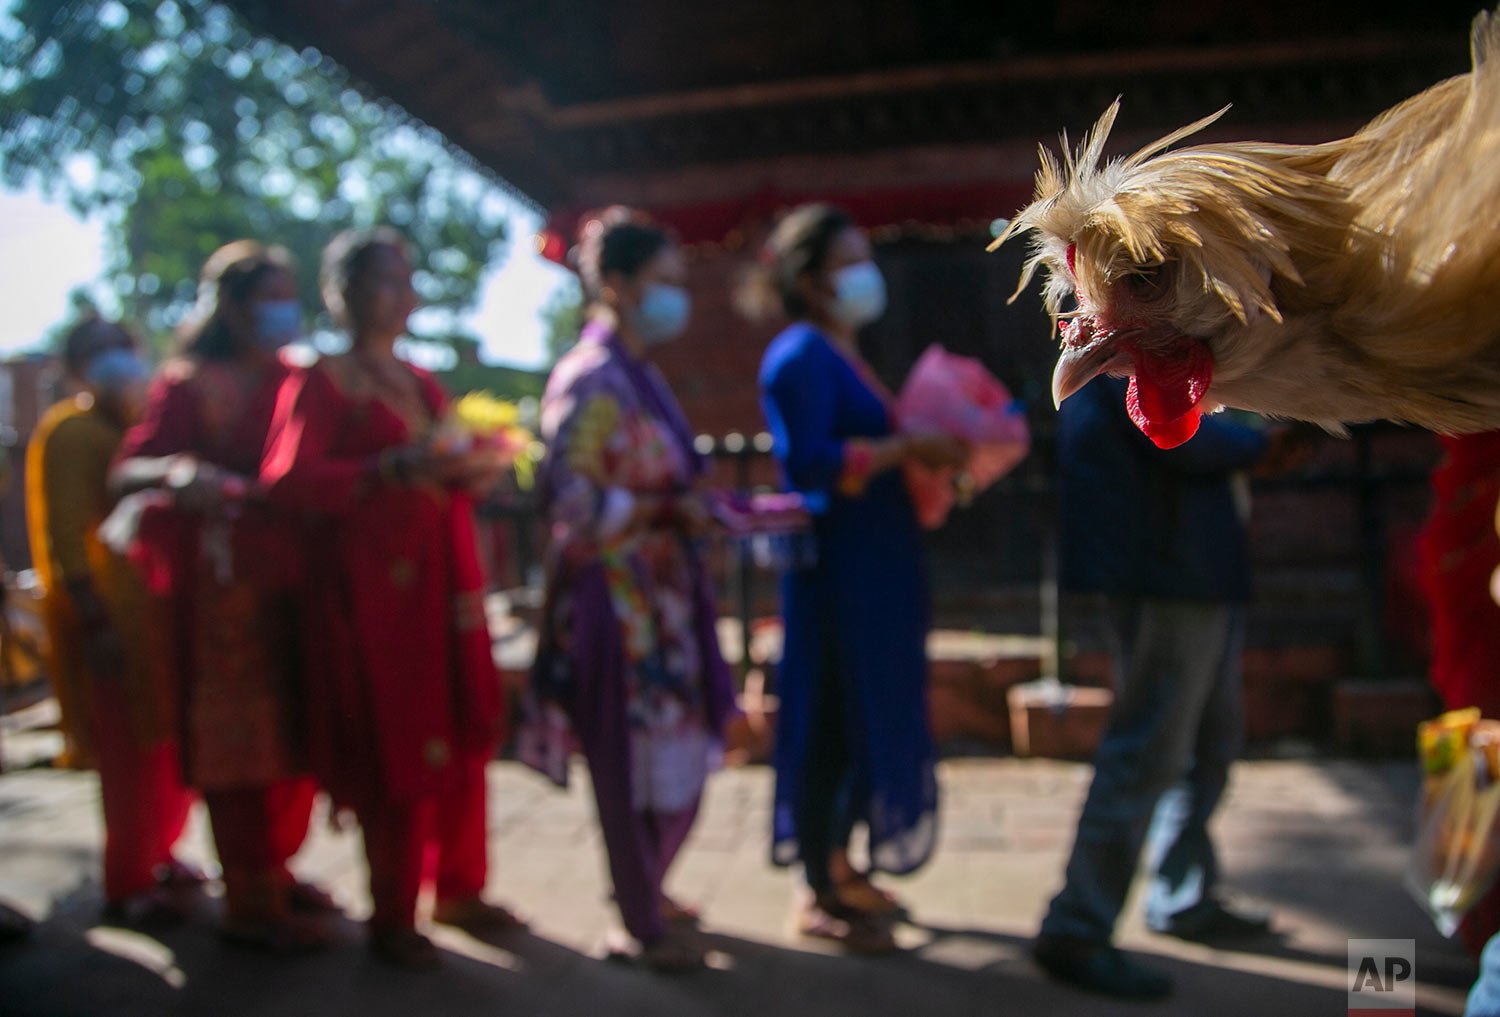  A sacrificial chicken is carried by a Hindu devotee as others stand in a queue to offer prayers at a temple on the ninth day of Dashain festival in Kathmandu, Nepal, Thursday, Oct. 14, 2021. (AP Photo/Niranjan Shrestha) 